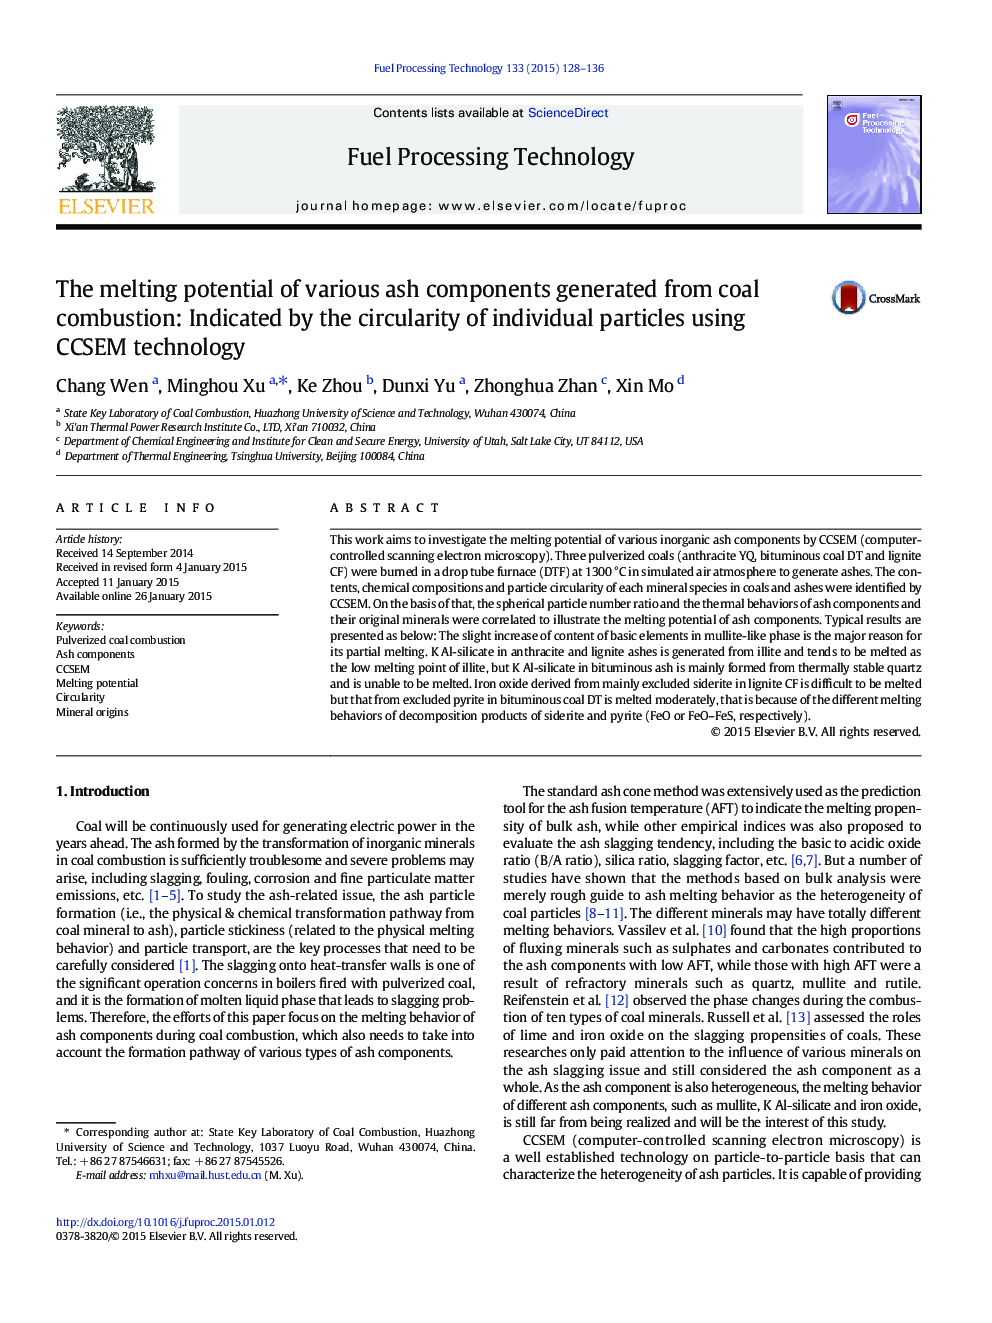 The melting potential of various ash components generated from coal combustion: Indicated by the circularity of individual particles using CCSEM technology